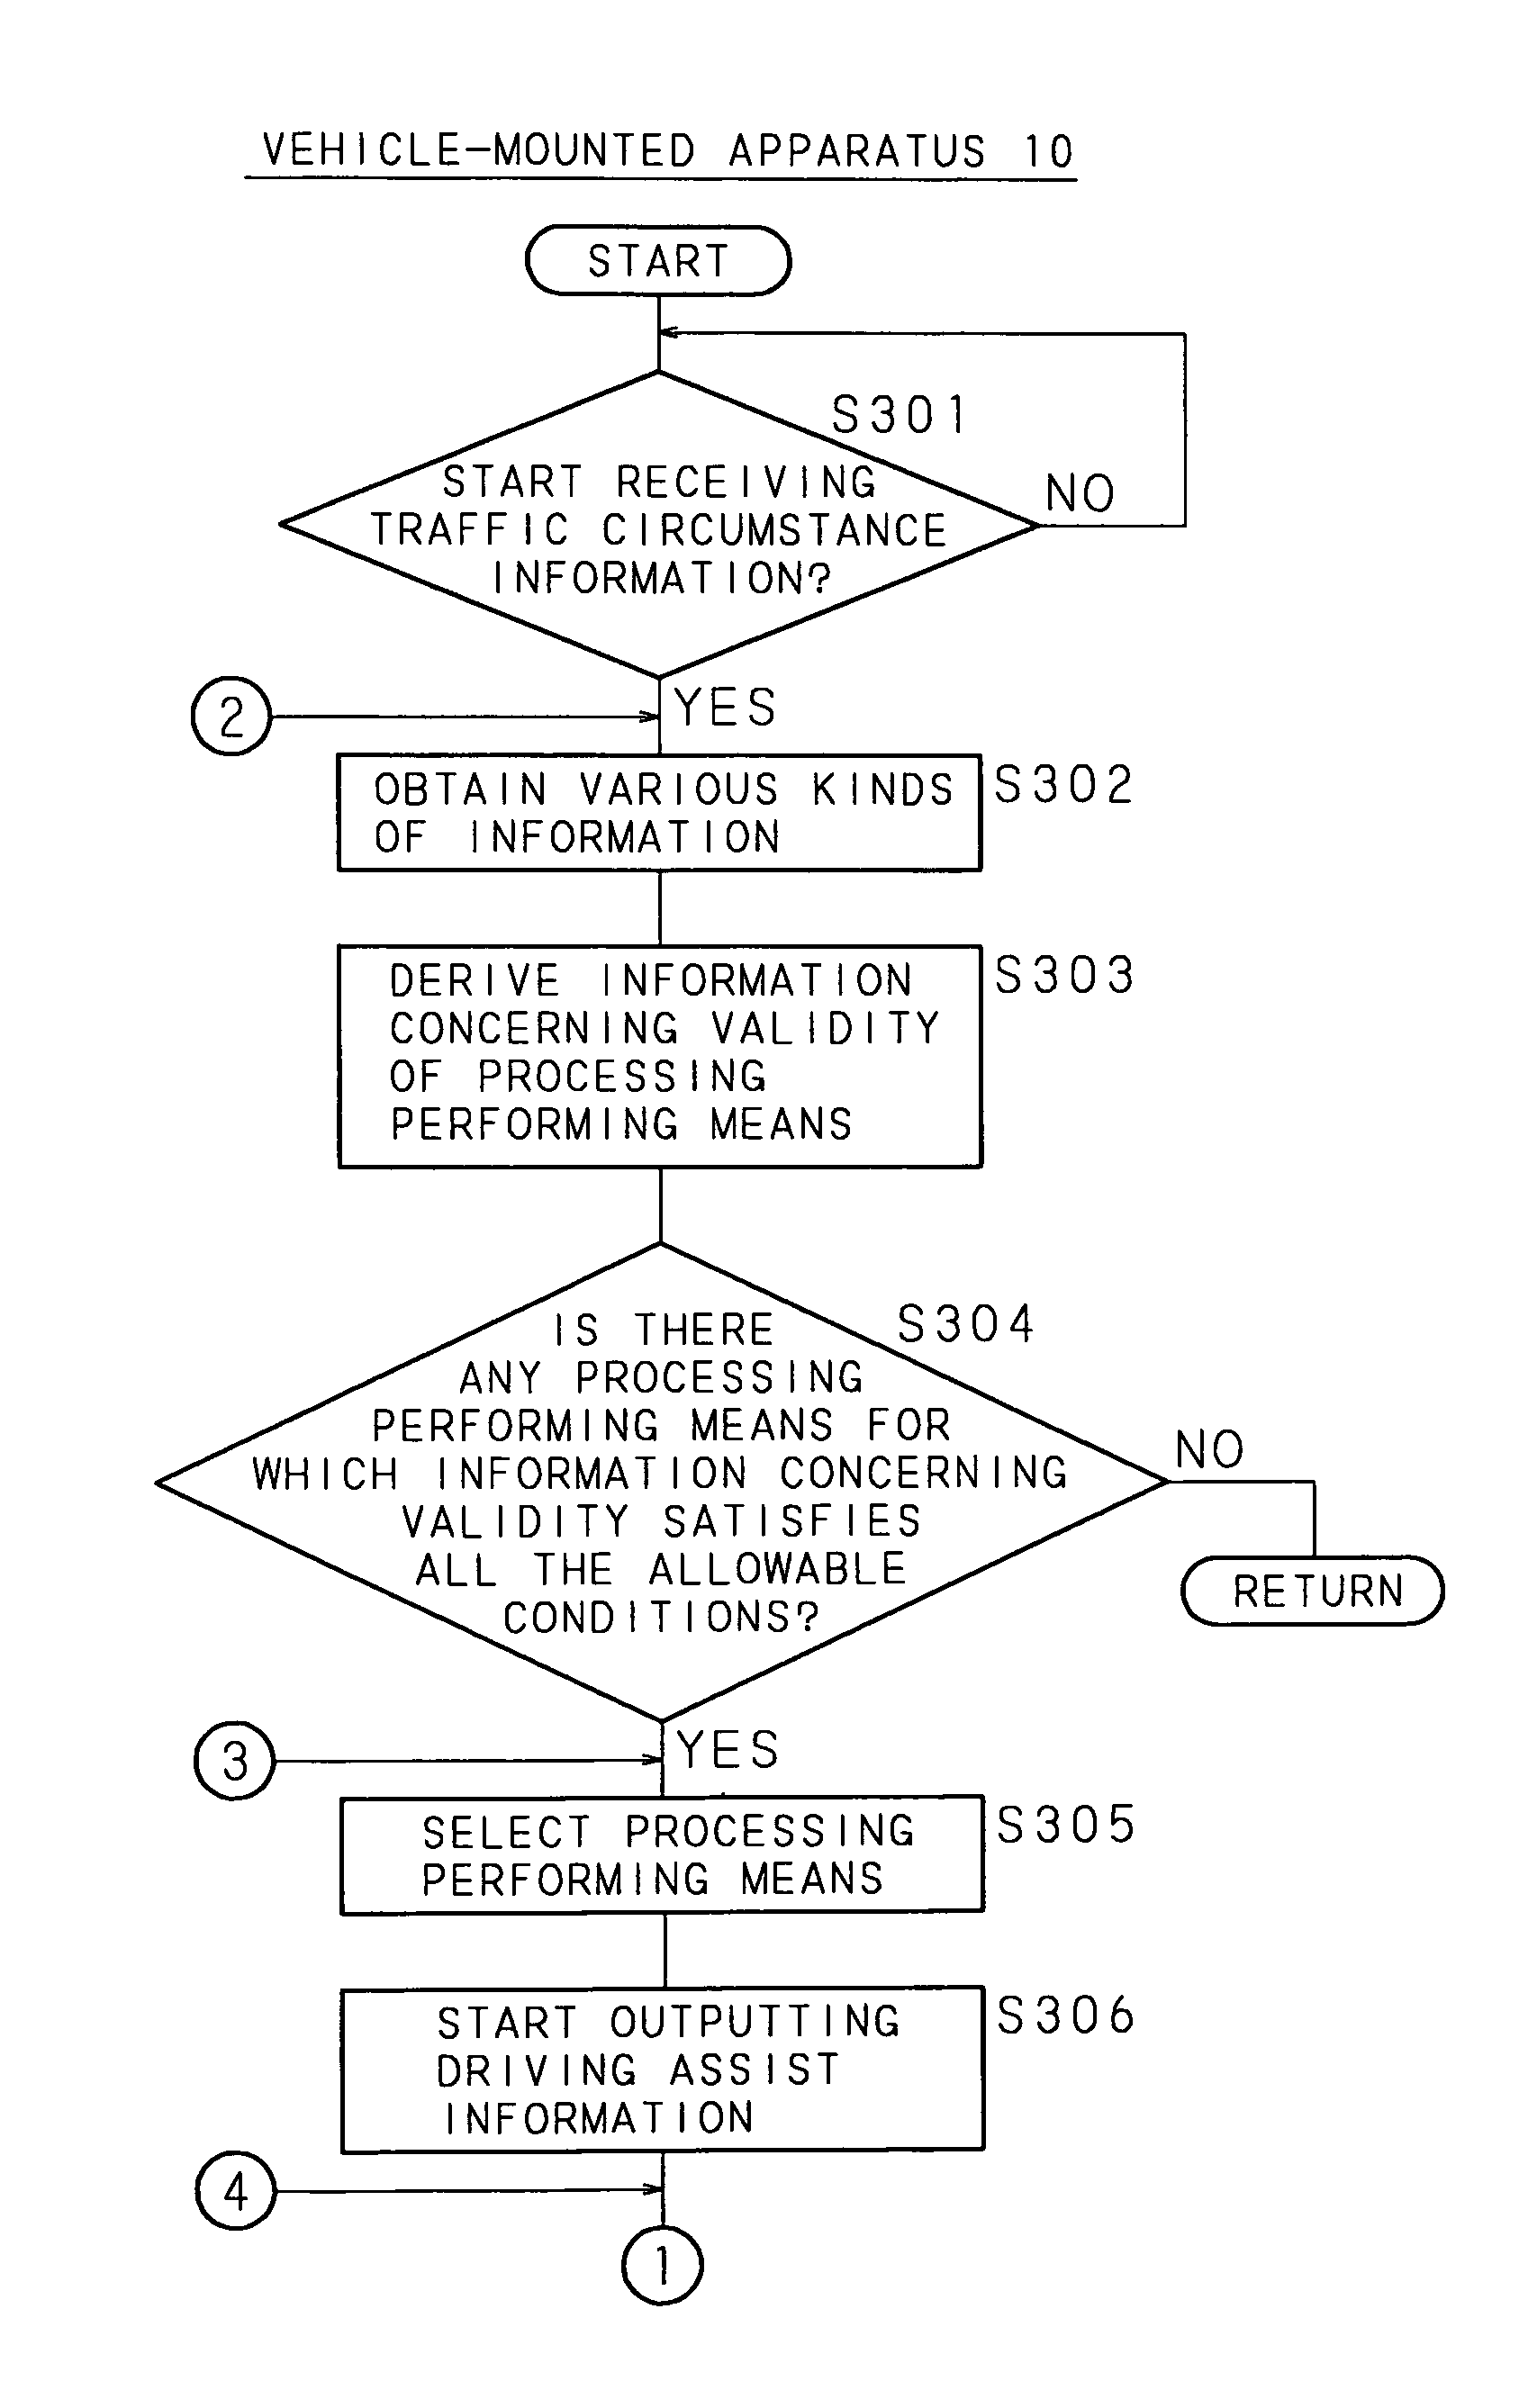 Driving assist system and vehicle-mounted apparatus